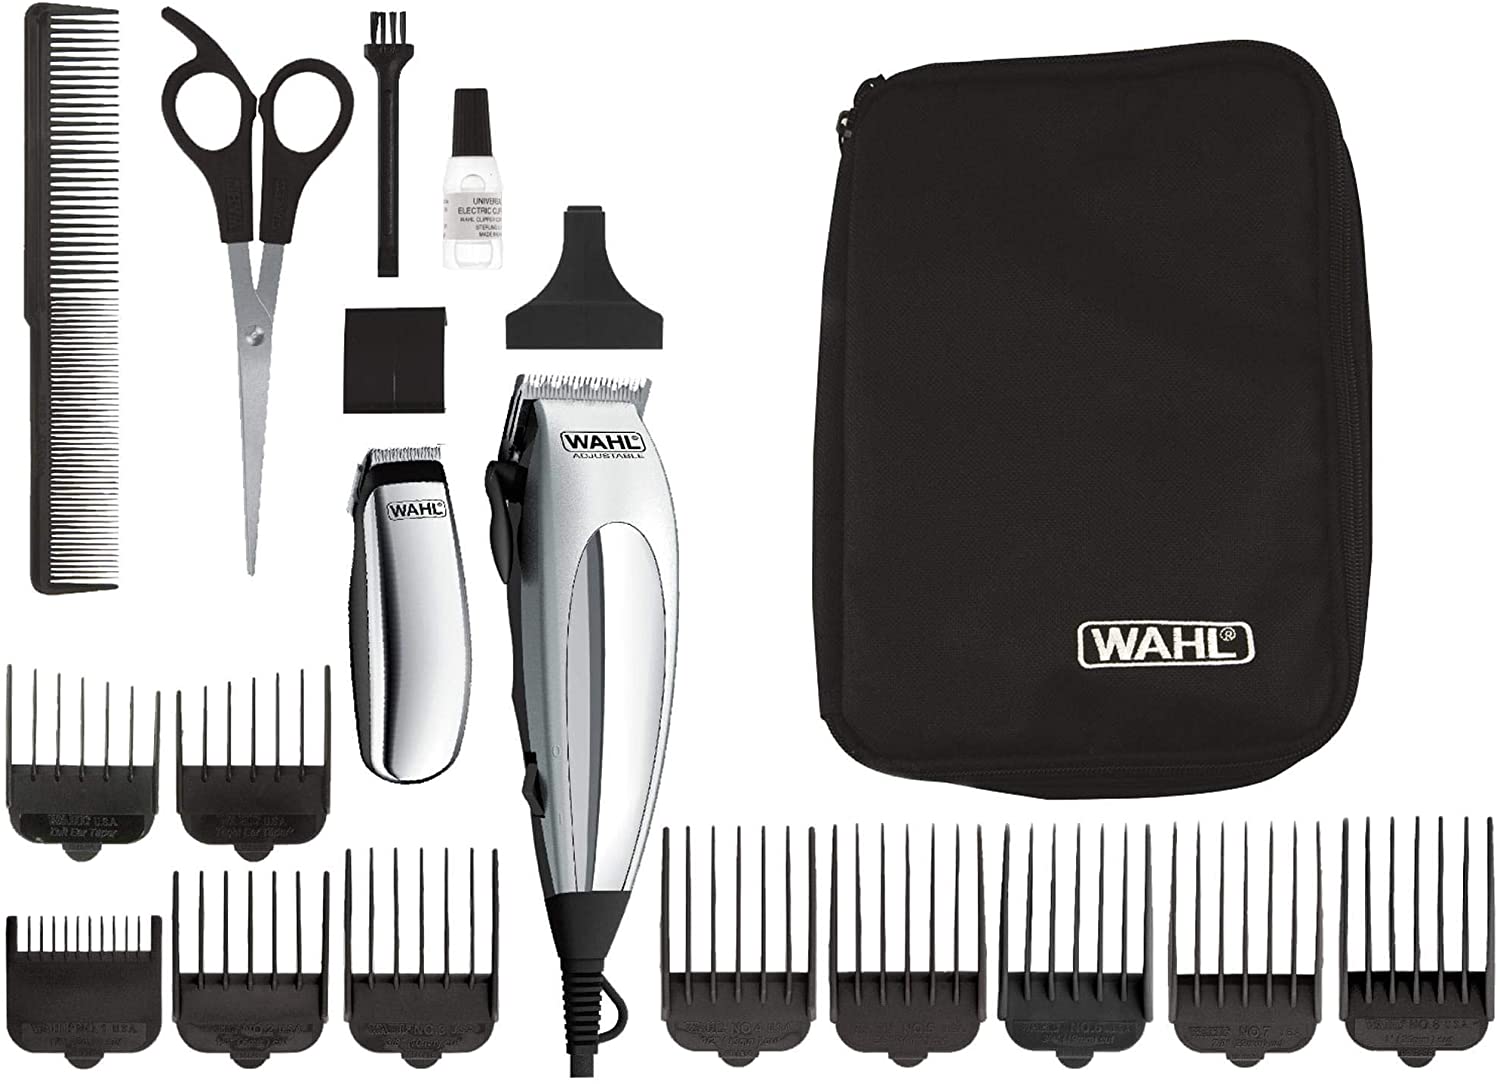 Wahl 79305-1316 HomePro Vogue Deluxe mains operated hair clipper set.